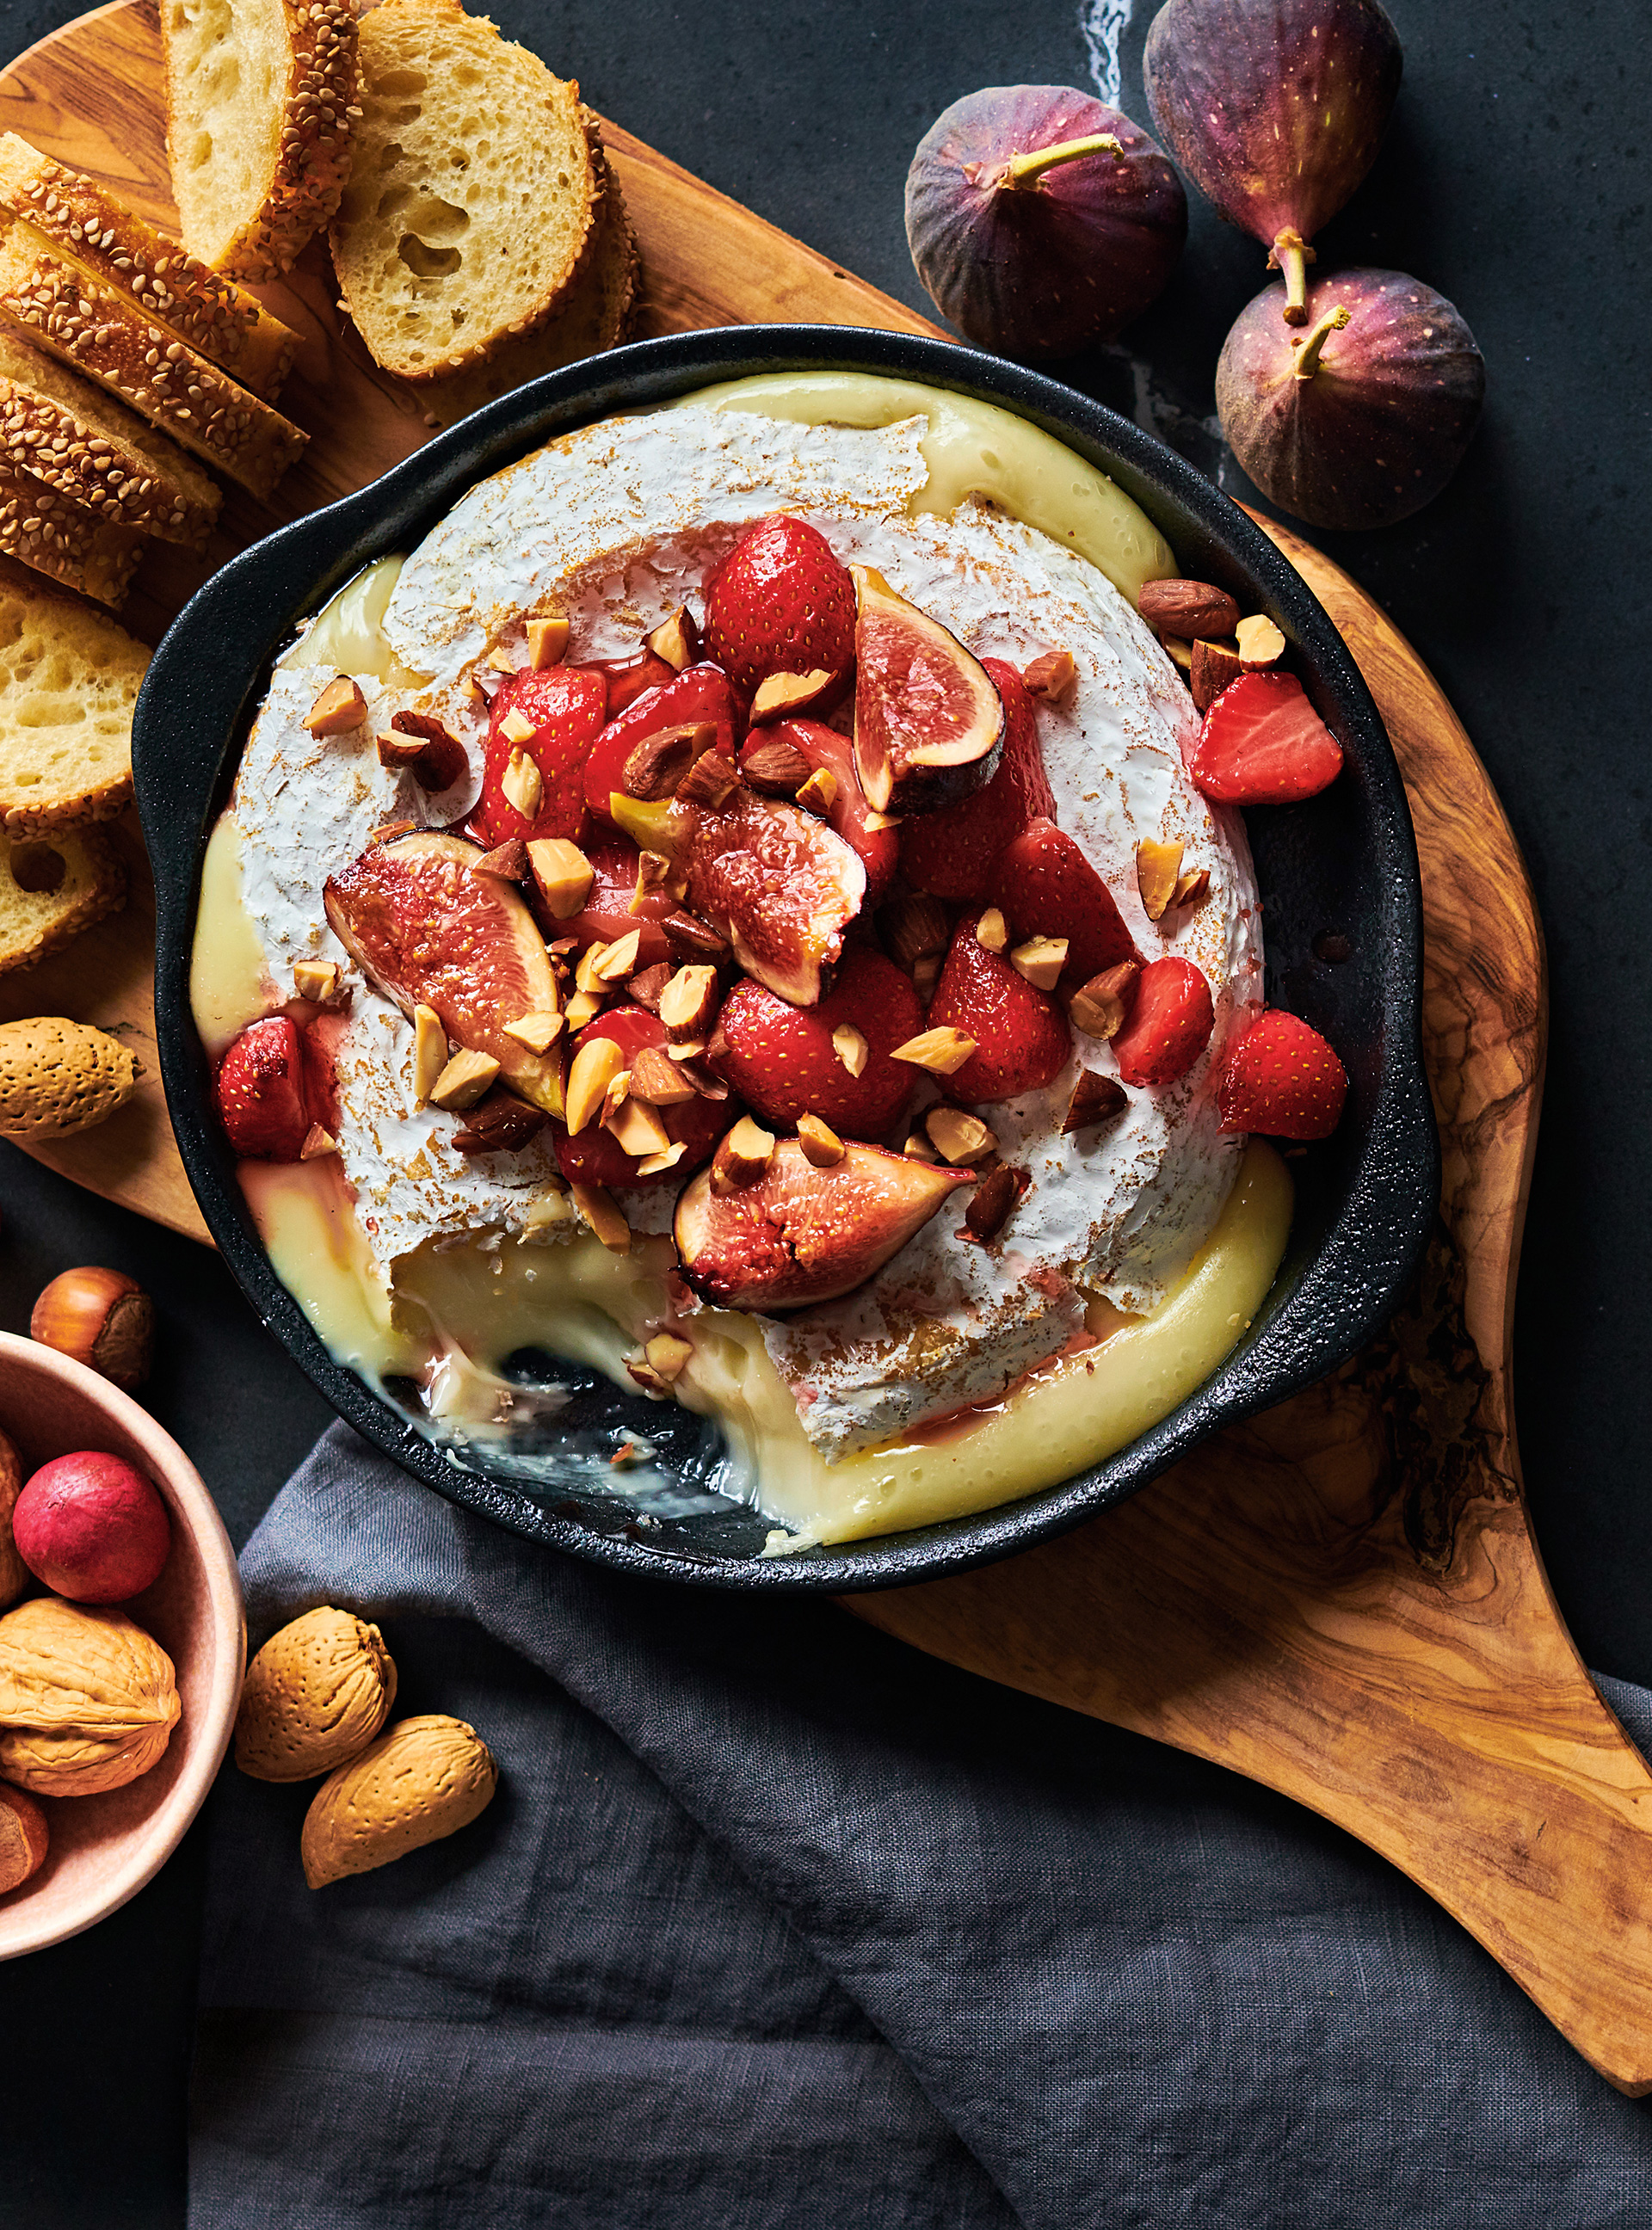 Warm Brie with Strawberries, Figs and Almonds